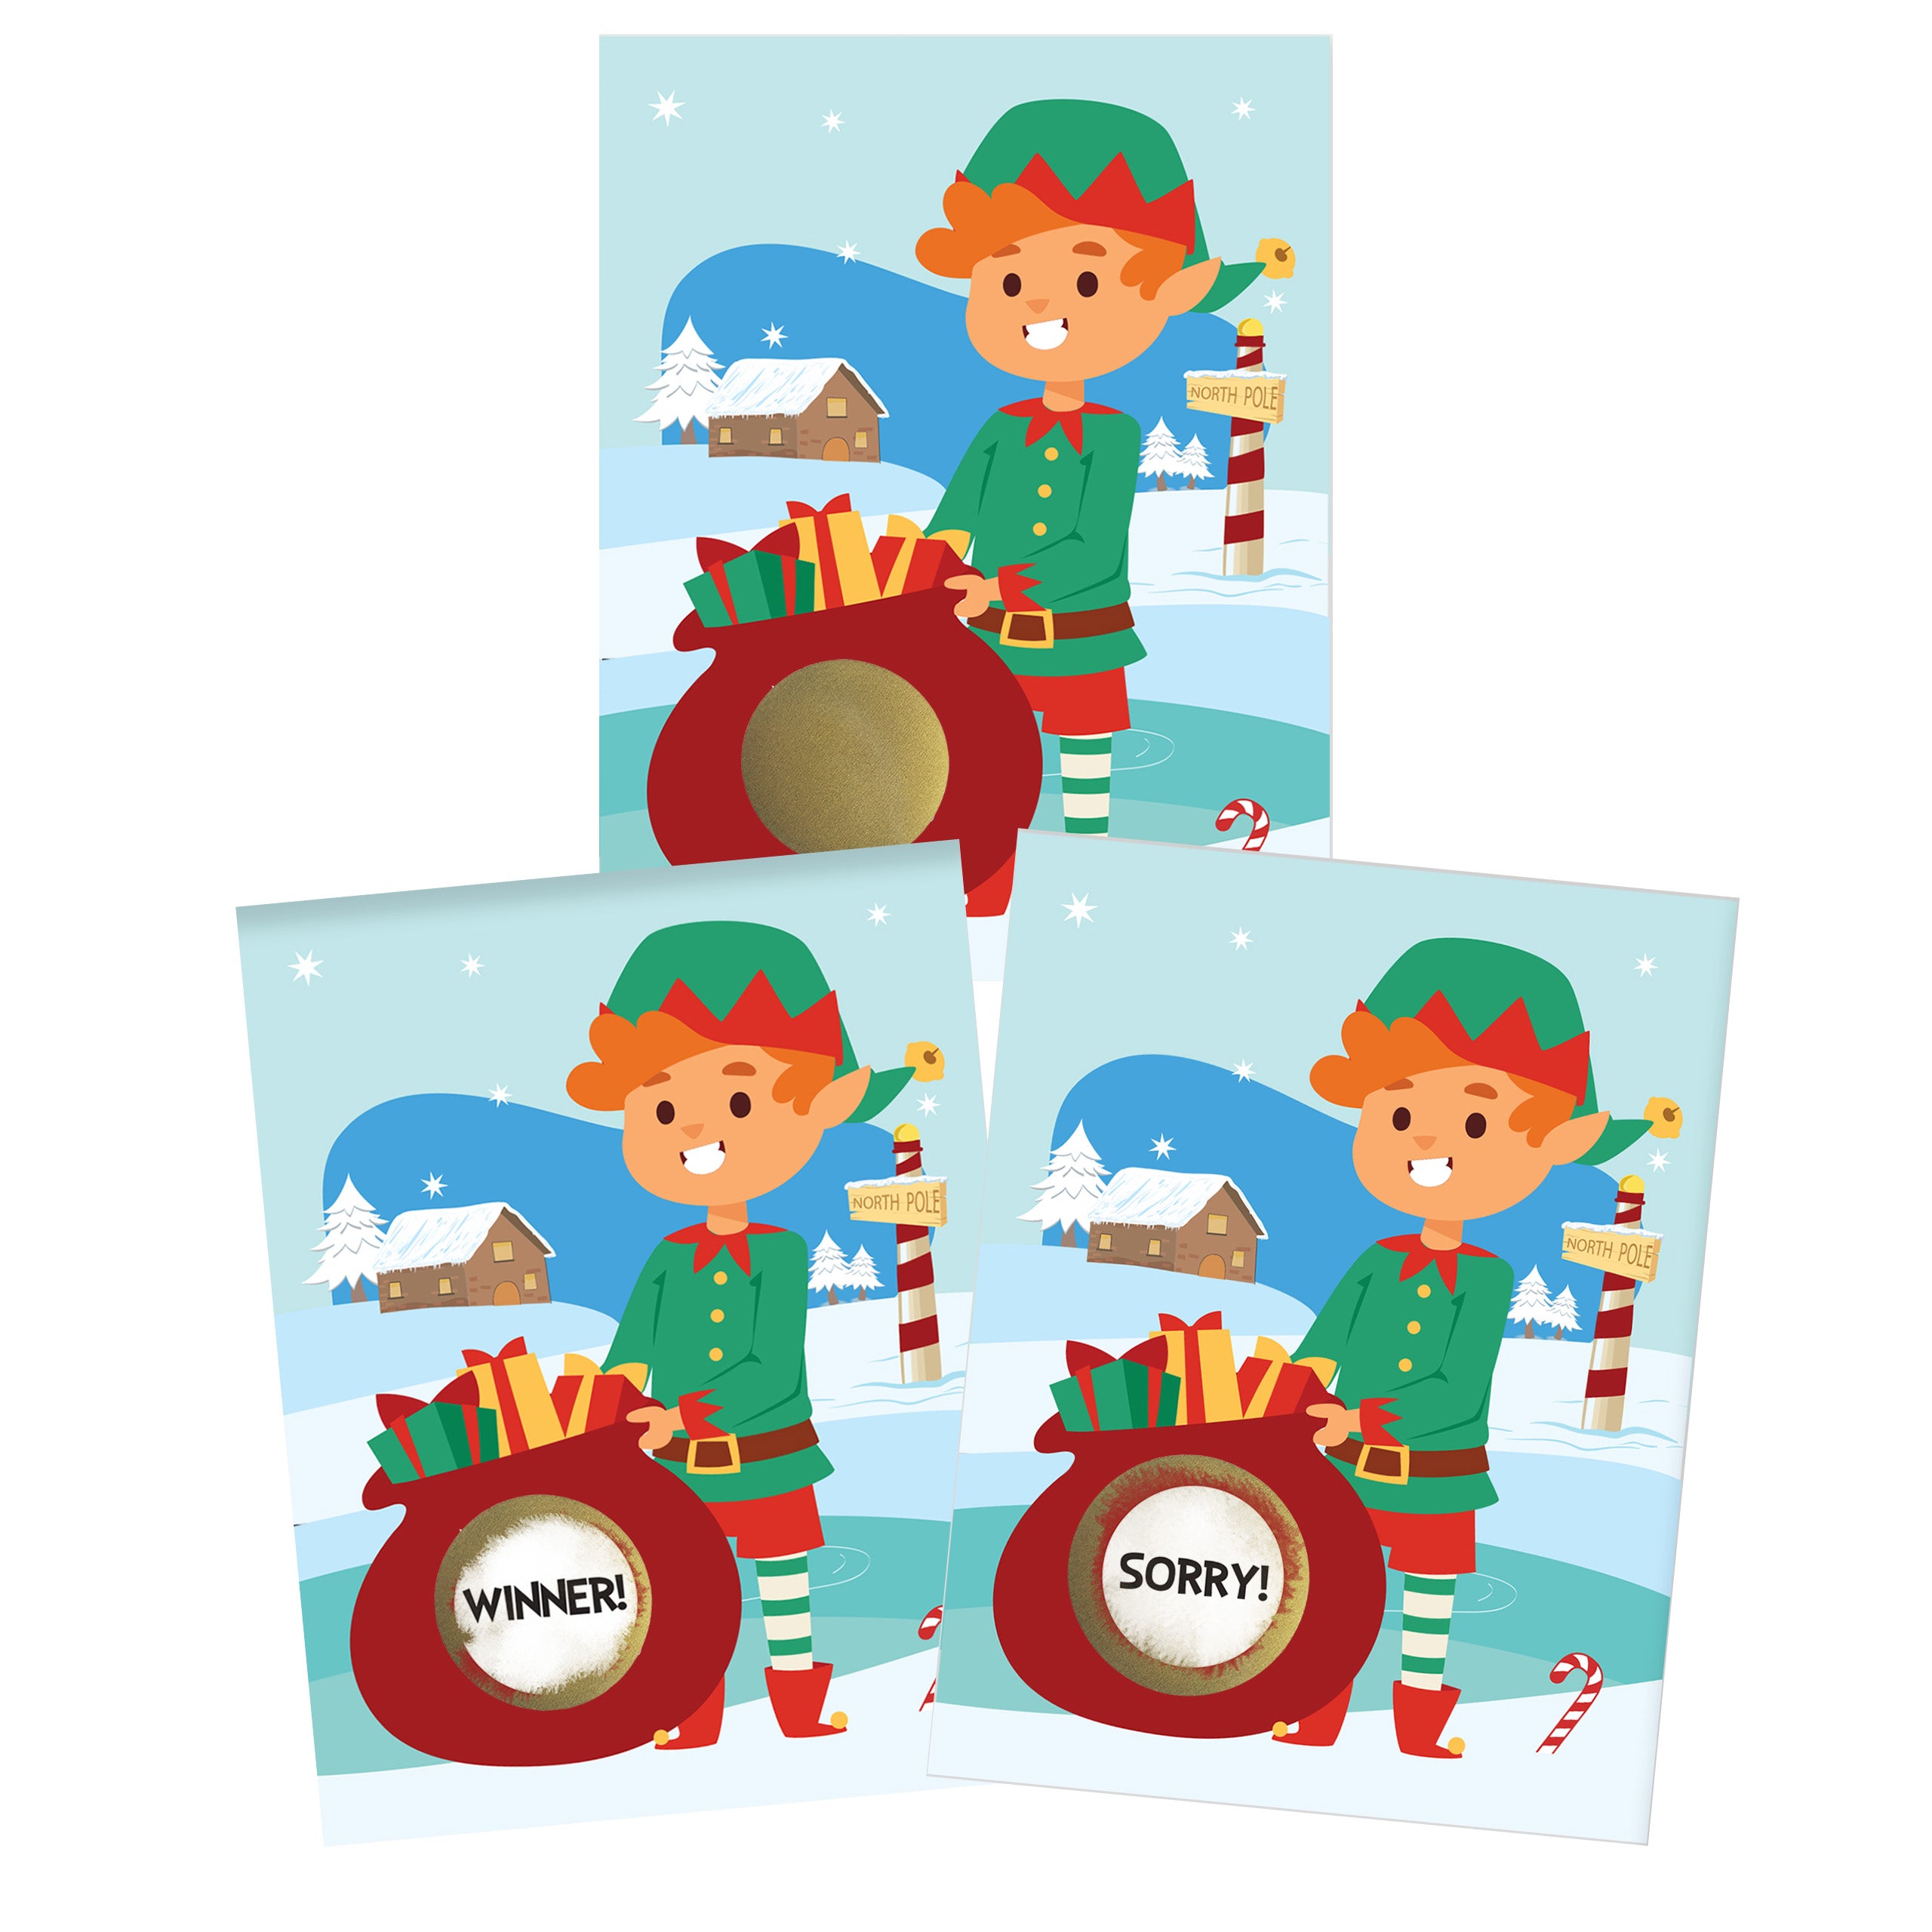 Elf Christmas Scratch Off Game Card 26 Pack - 2 Winning and 24 Non-Winning Cards - My Scratch Offs